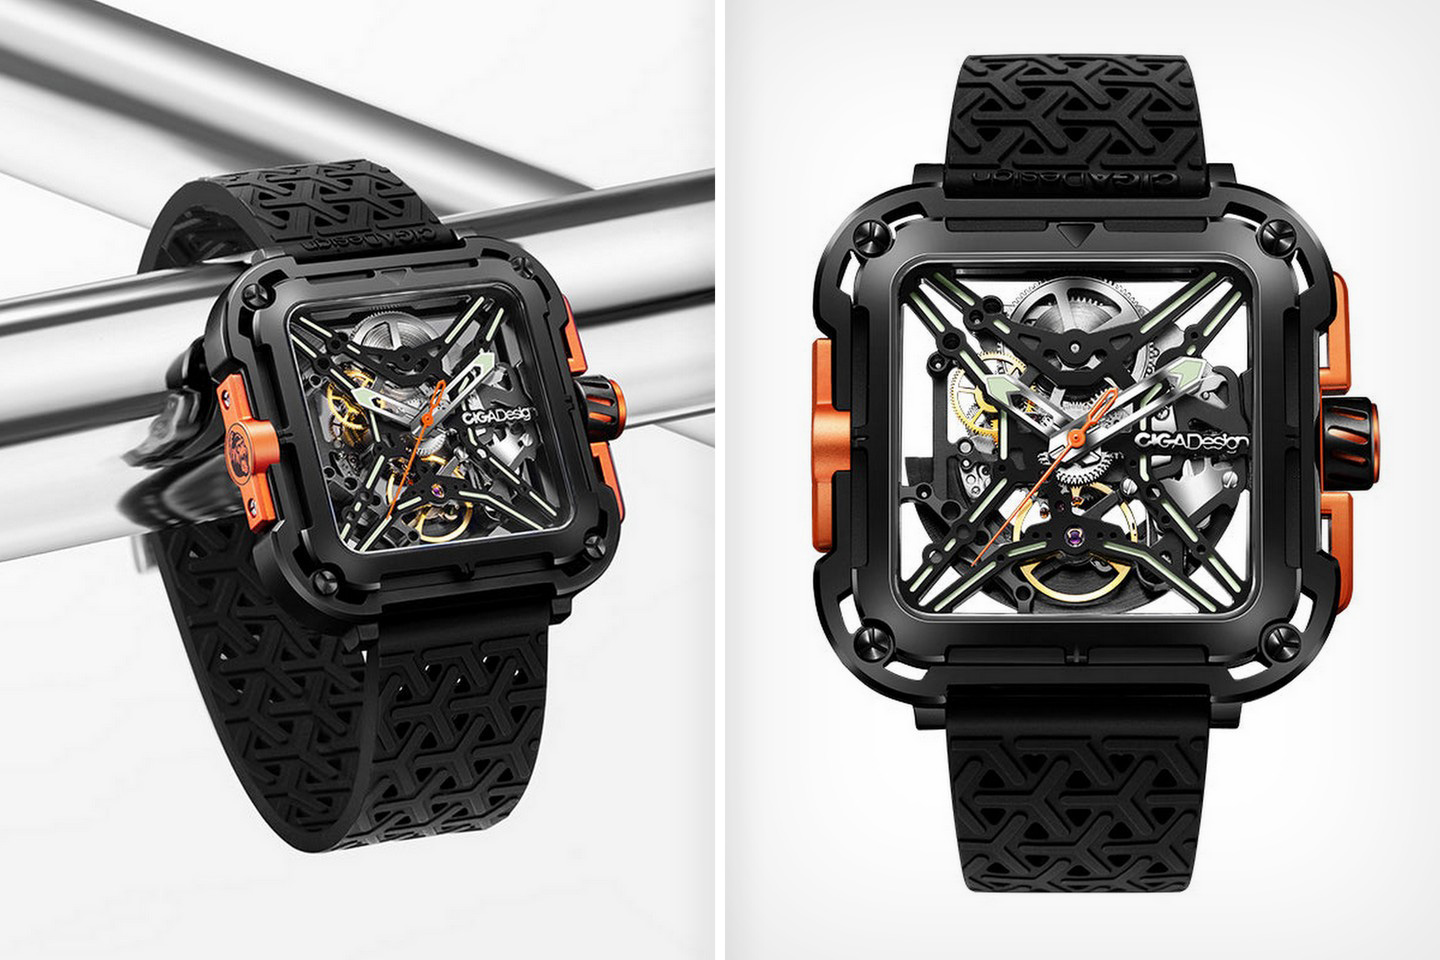 #Gorgeous Skeleton Watch comes with a captivating rugged cyberpunk design